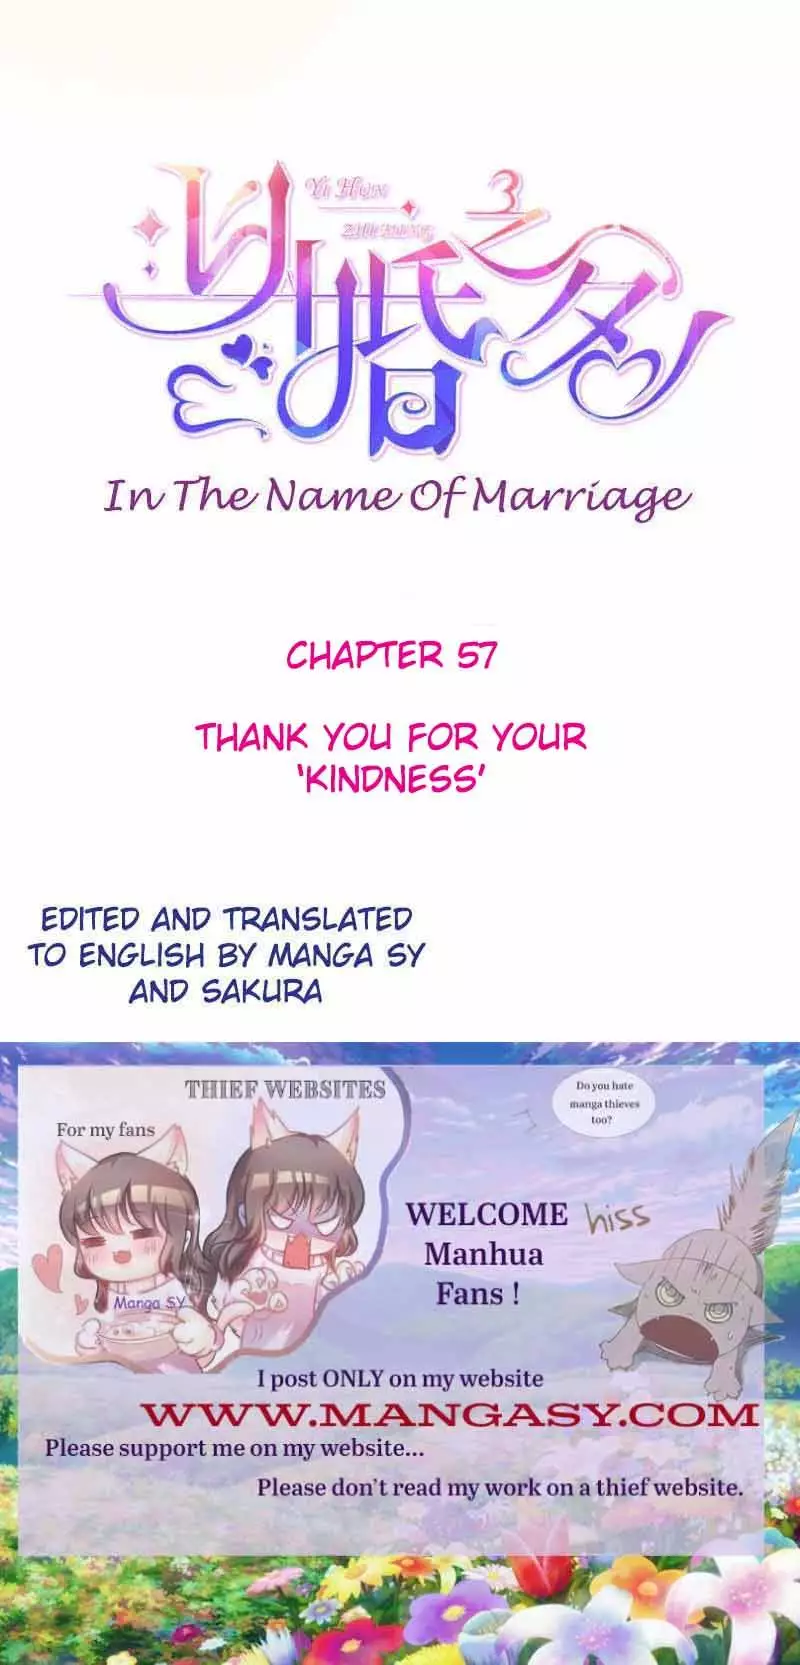 In The Name Of Marriage - 57 page 1-a64fabb4